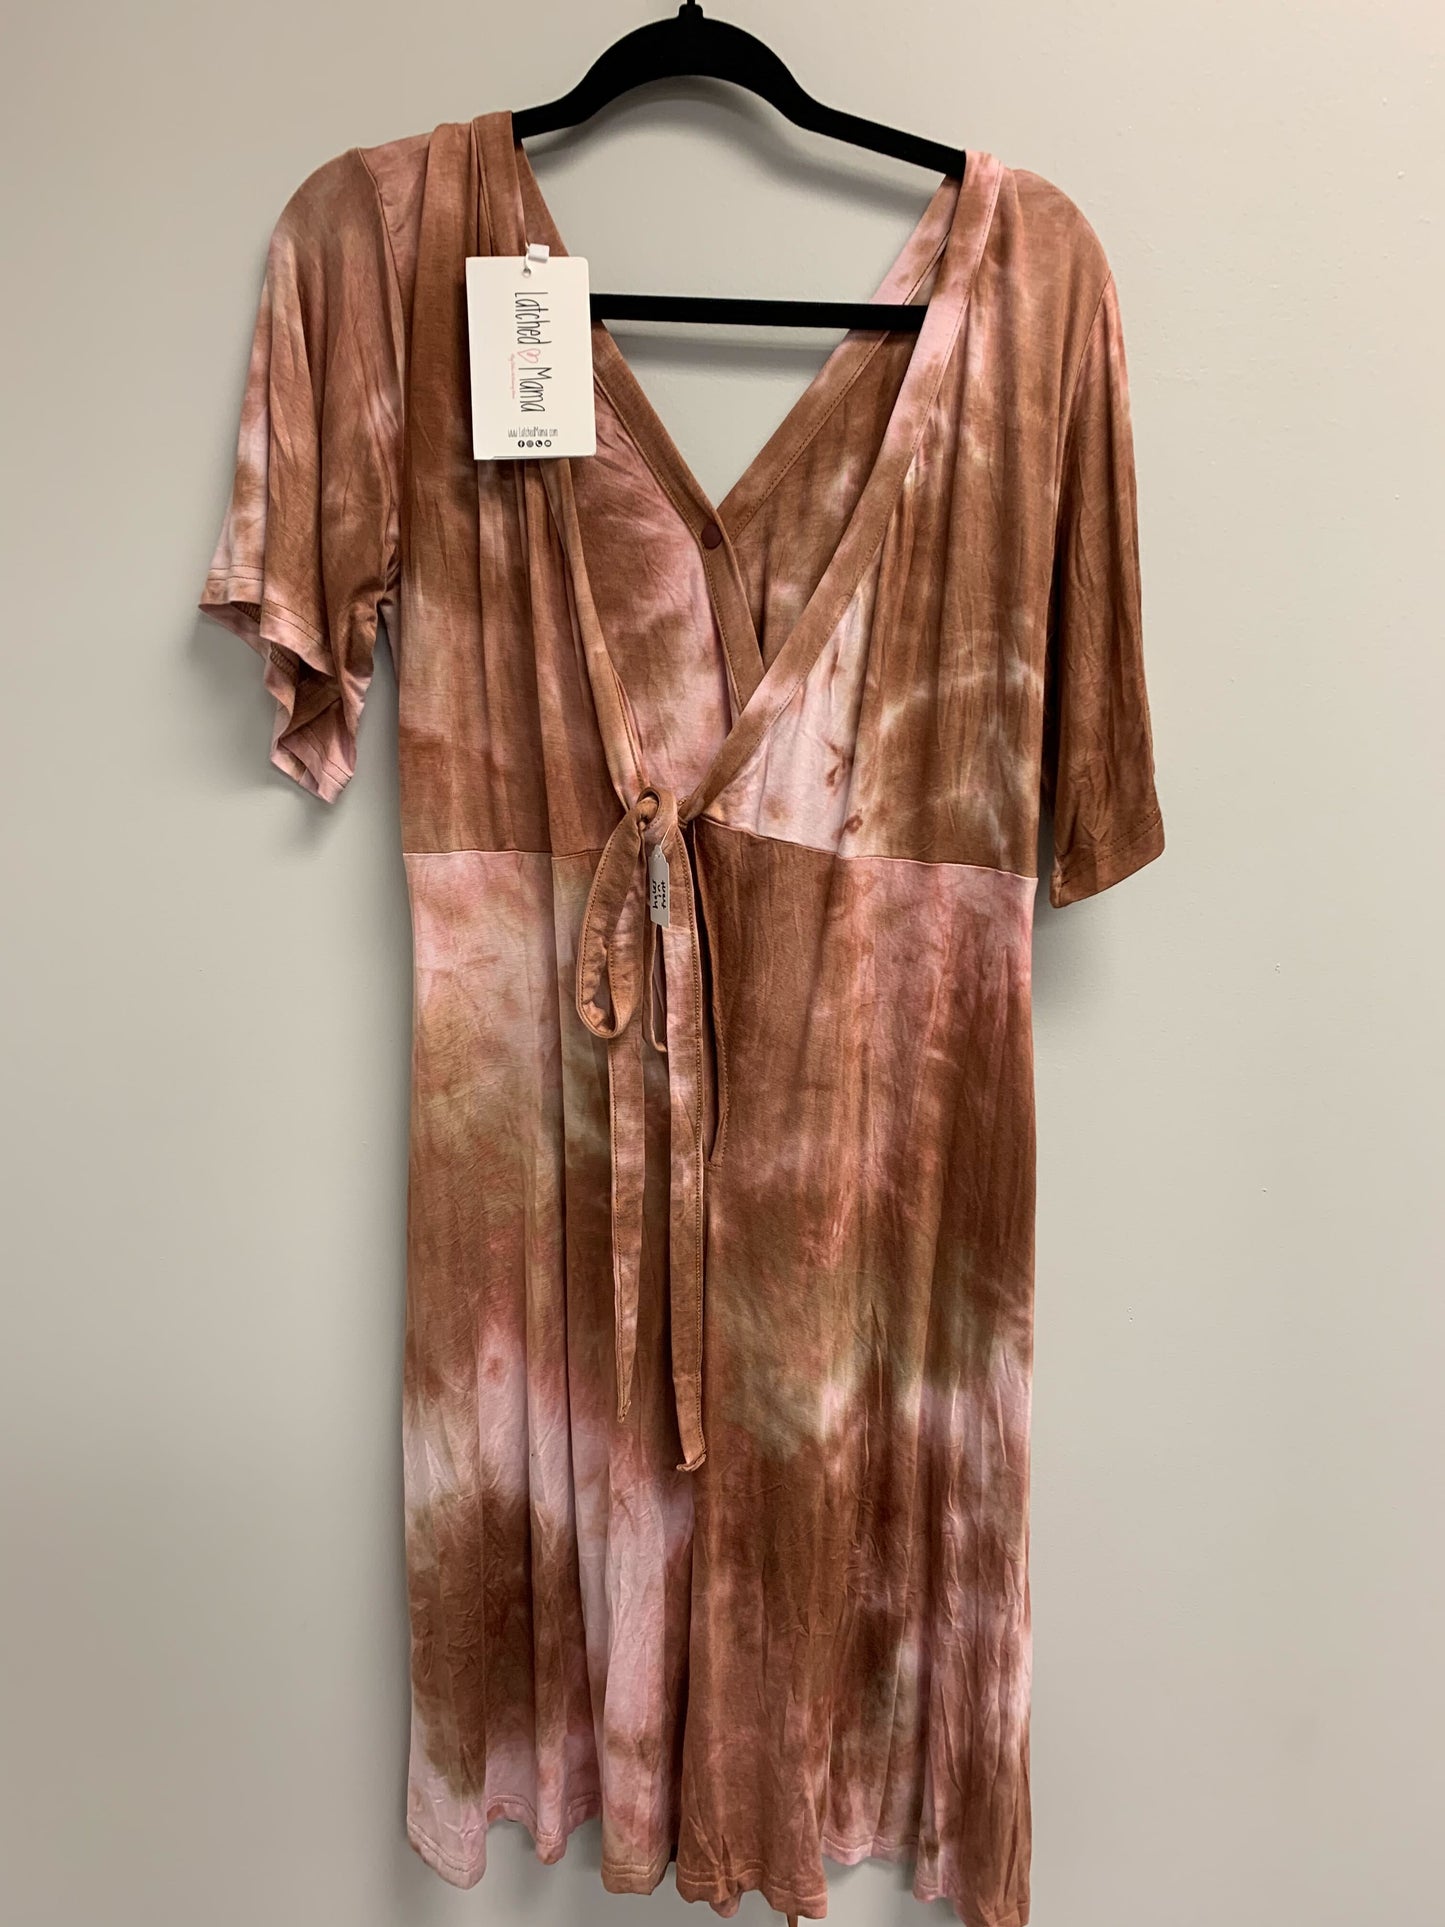 Outlet 5354 - Latched Mama Labor & Postpartum Wrap Dress - Rust Tie Dye - Small